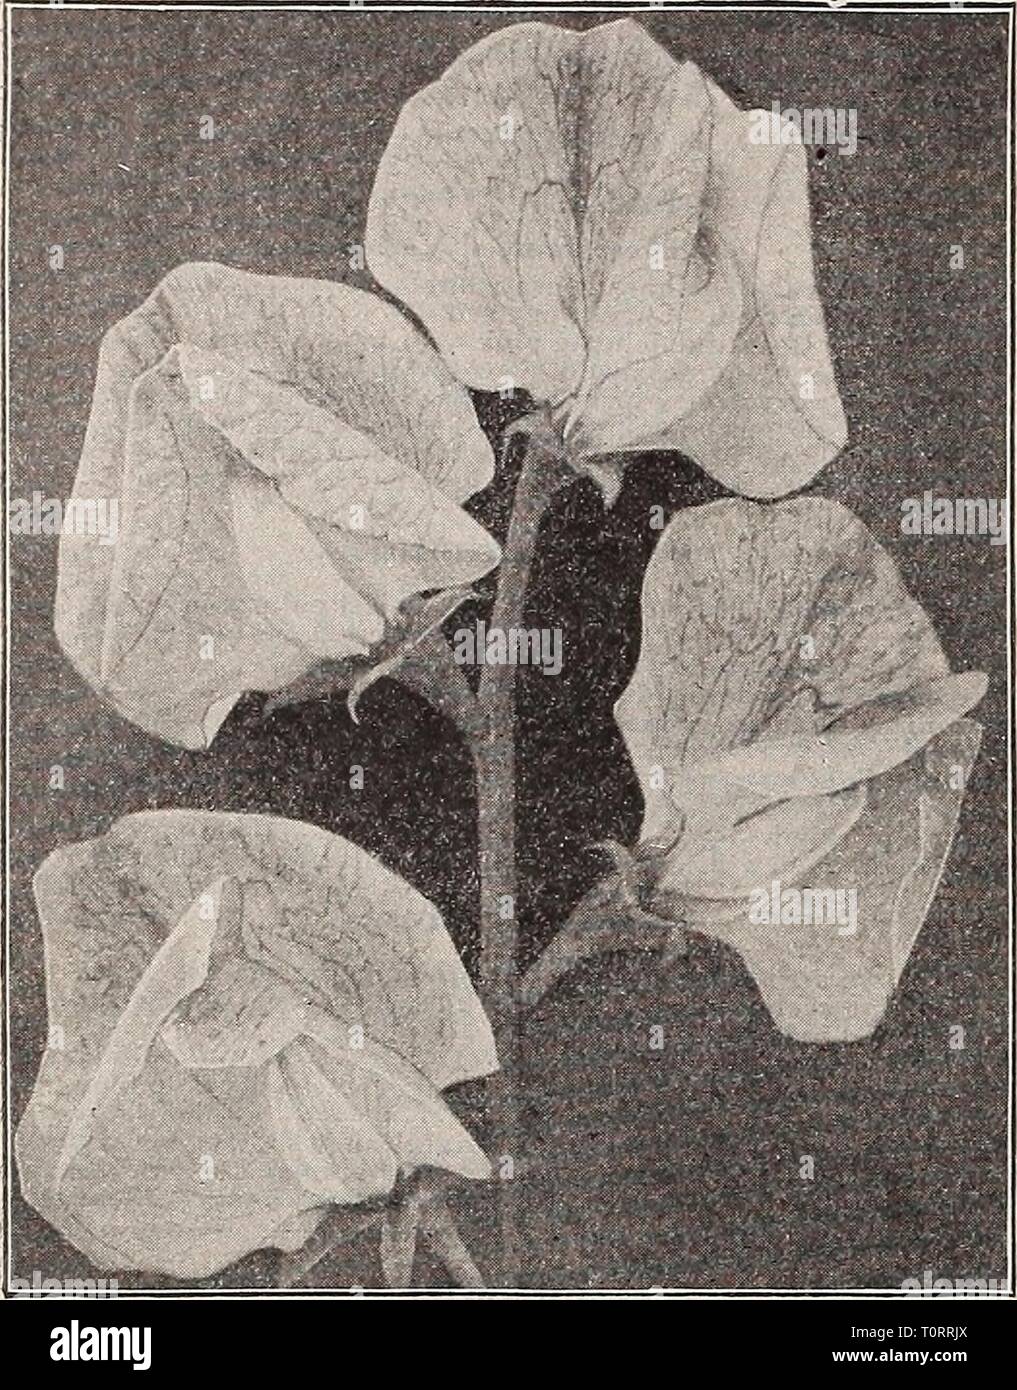 Dreer's autumn catalogue 1911 (1911) Dreer's autumn catalogue 1911  dreersautumncata1911henr Year: 1911  70 IHEflRTADREER -PHIIADEliPHIAWm REIIA51E FLOWER SEEDS    Sweet PeasâHelen Pierce. Sweet Peas. As a rule the finest Sweet Peas are produced from seed sown in the autumn. Plant abaut the end of November in this latitude and cover with 2 to 3 inches of leaves or litter. We list below only a few of the very finest sorts. For complete . list see pages 67, 120 and 121 of our Garden Book for 1911. Winter Blooming Sweet Peas. Invaluable for growing under glass. They bloom in about three months fr Stock Photo